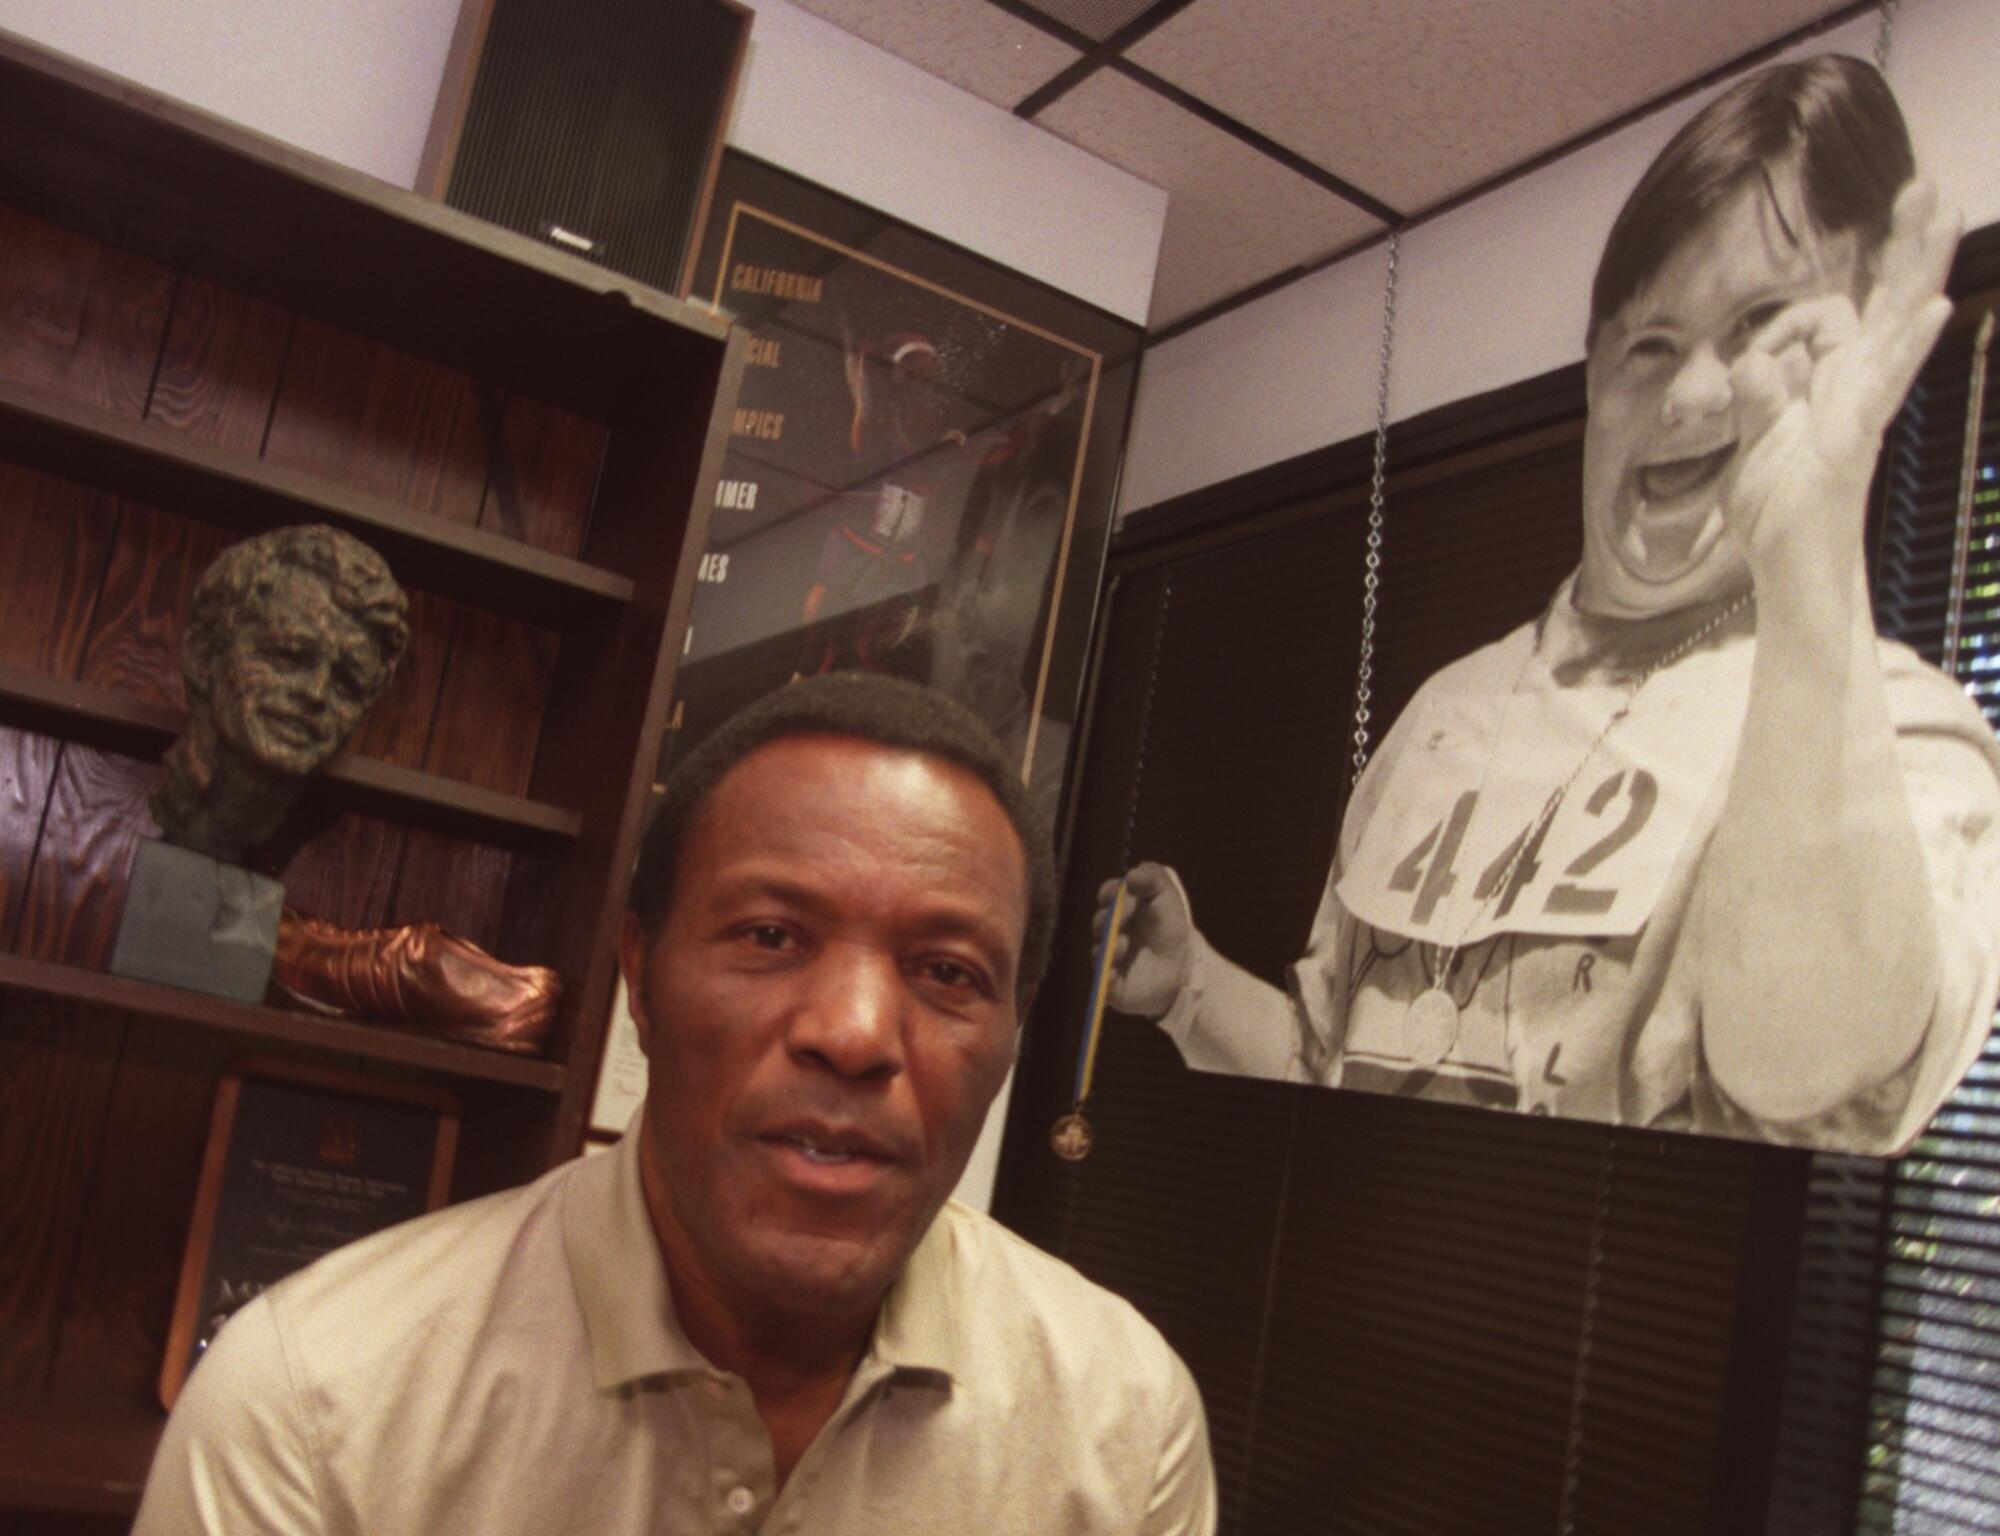 Rafer Johnson works as a volunteer for the Special Olympics in his office in Culver City.